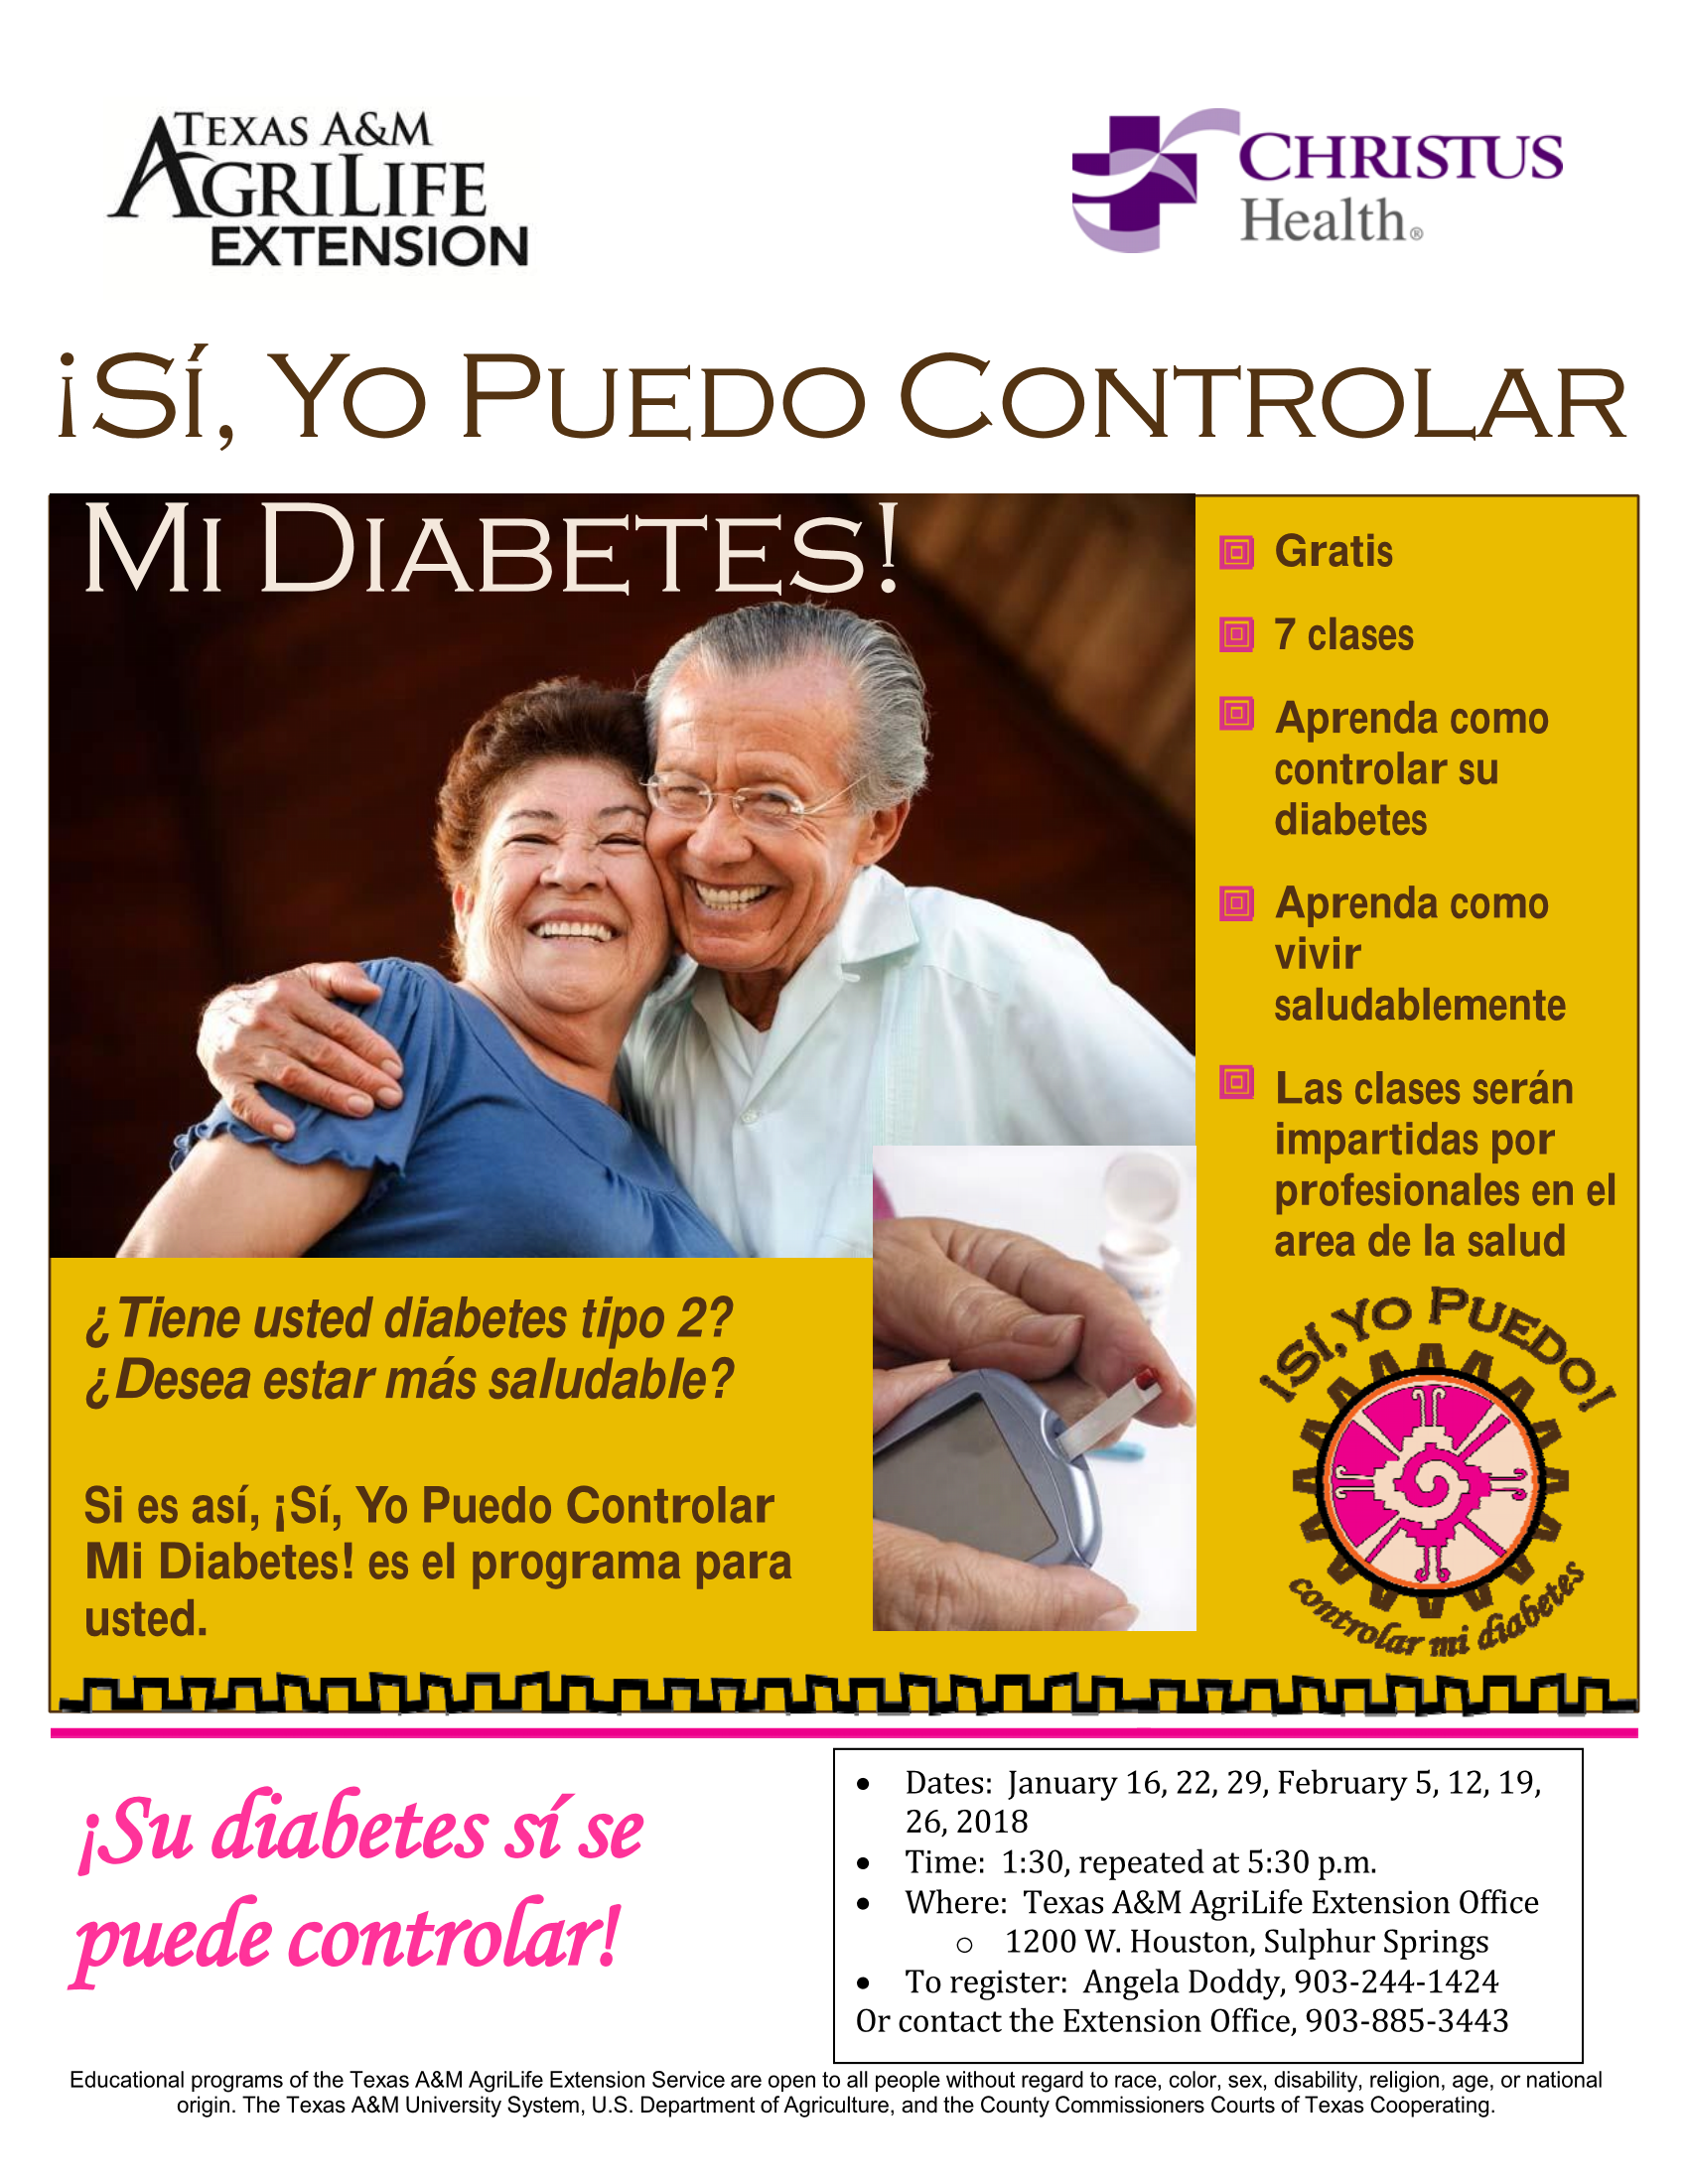 ¡Si, Yo Puedo Controlar Mi Diabetes!-A great opportunity to learn more about controlling type 2 diabetes